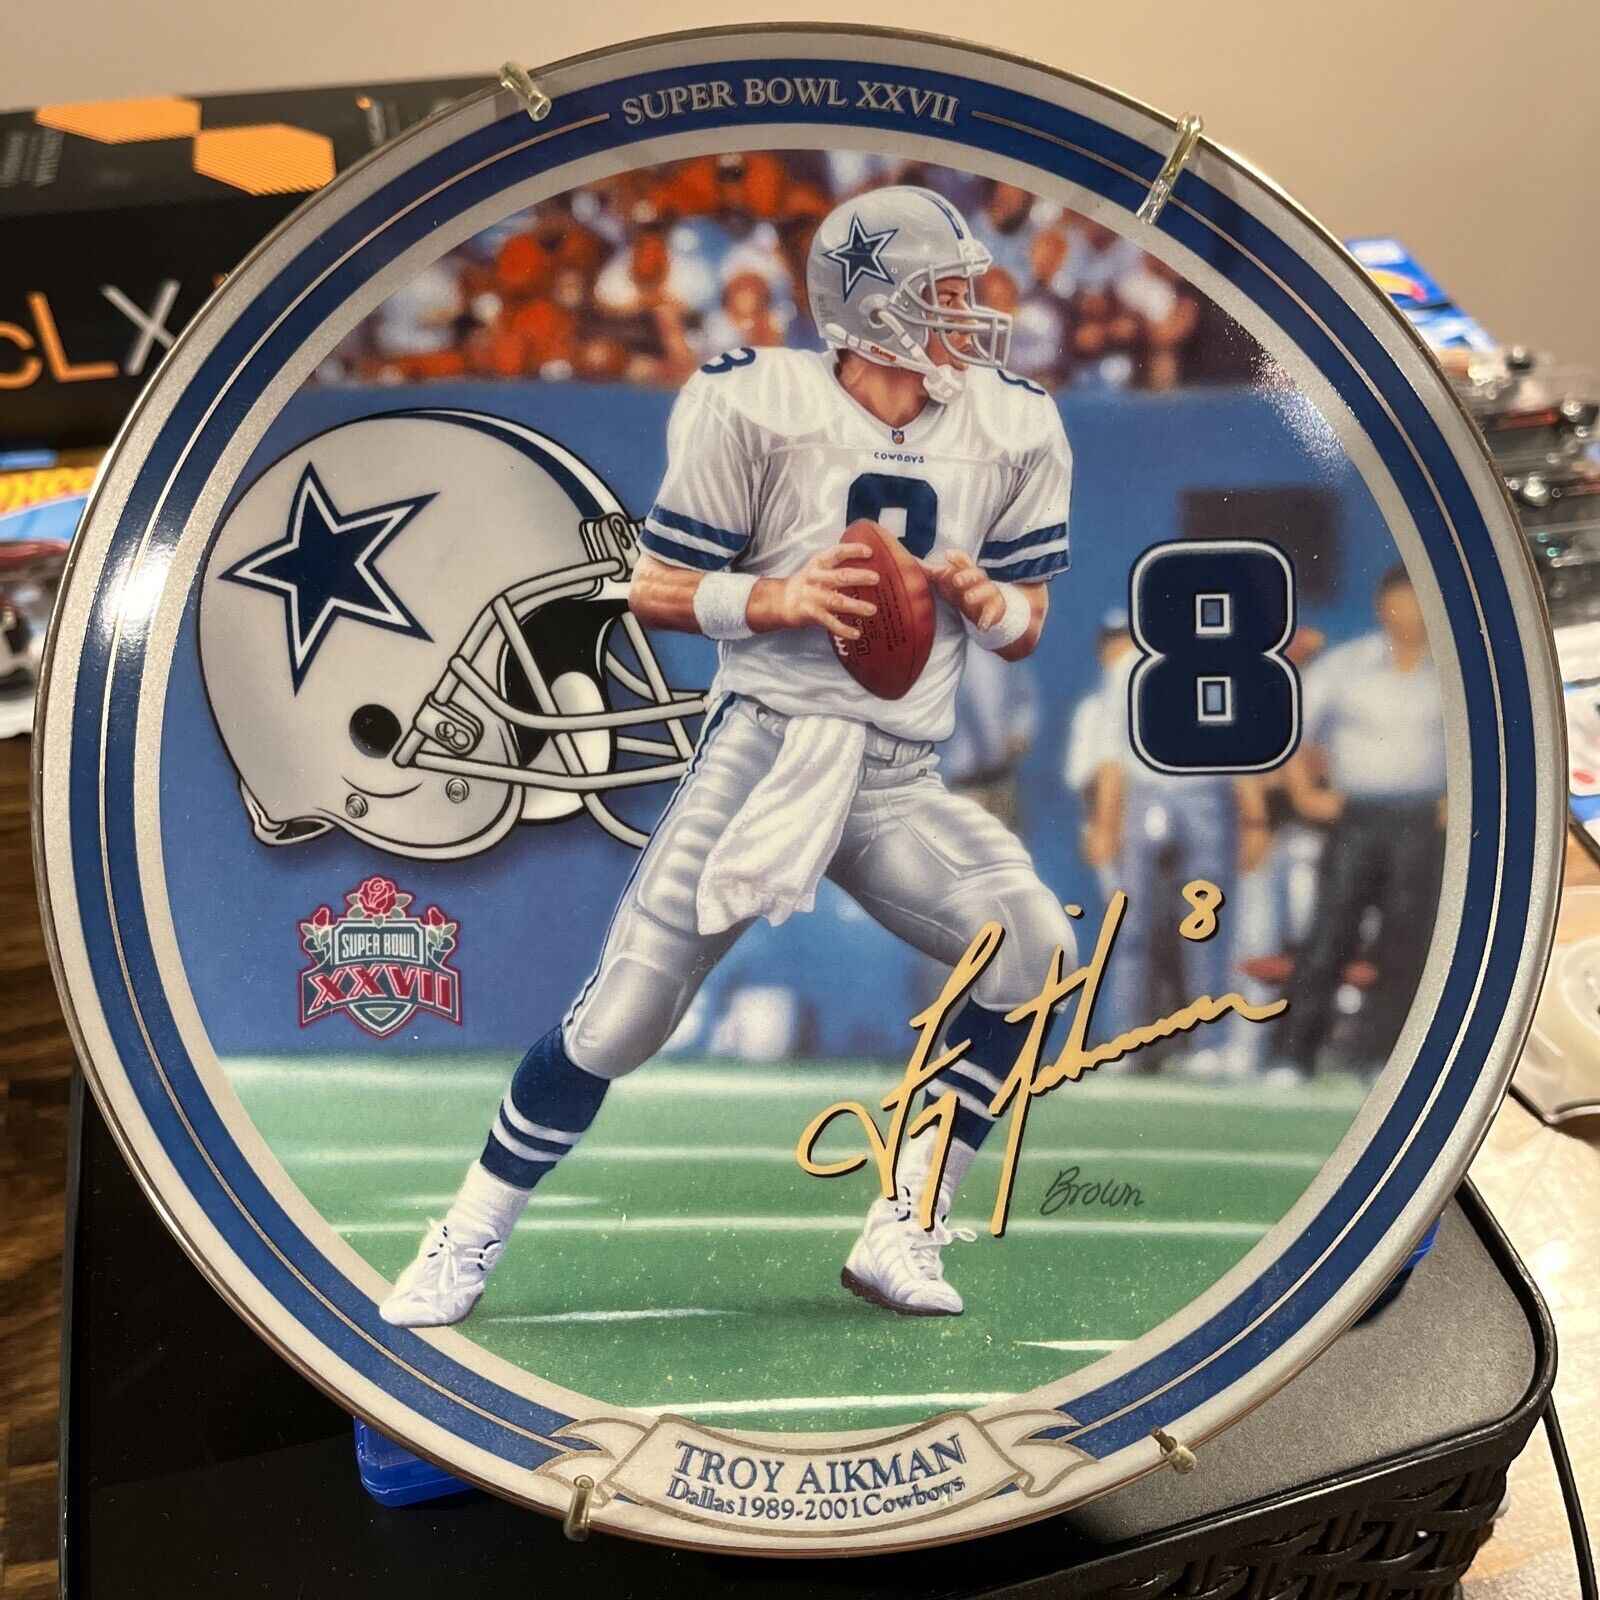 Super Bowl XXVII by Rick Brown Collector Plate America's Quarterback Troy Aikman